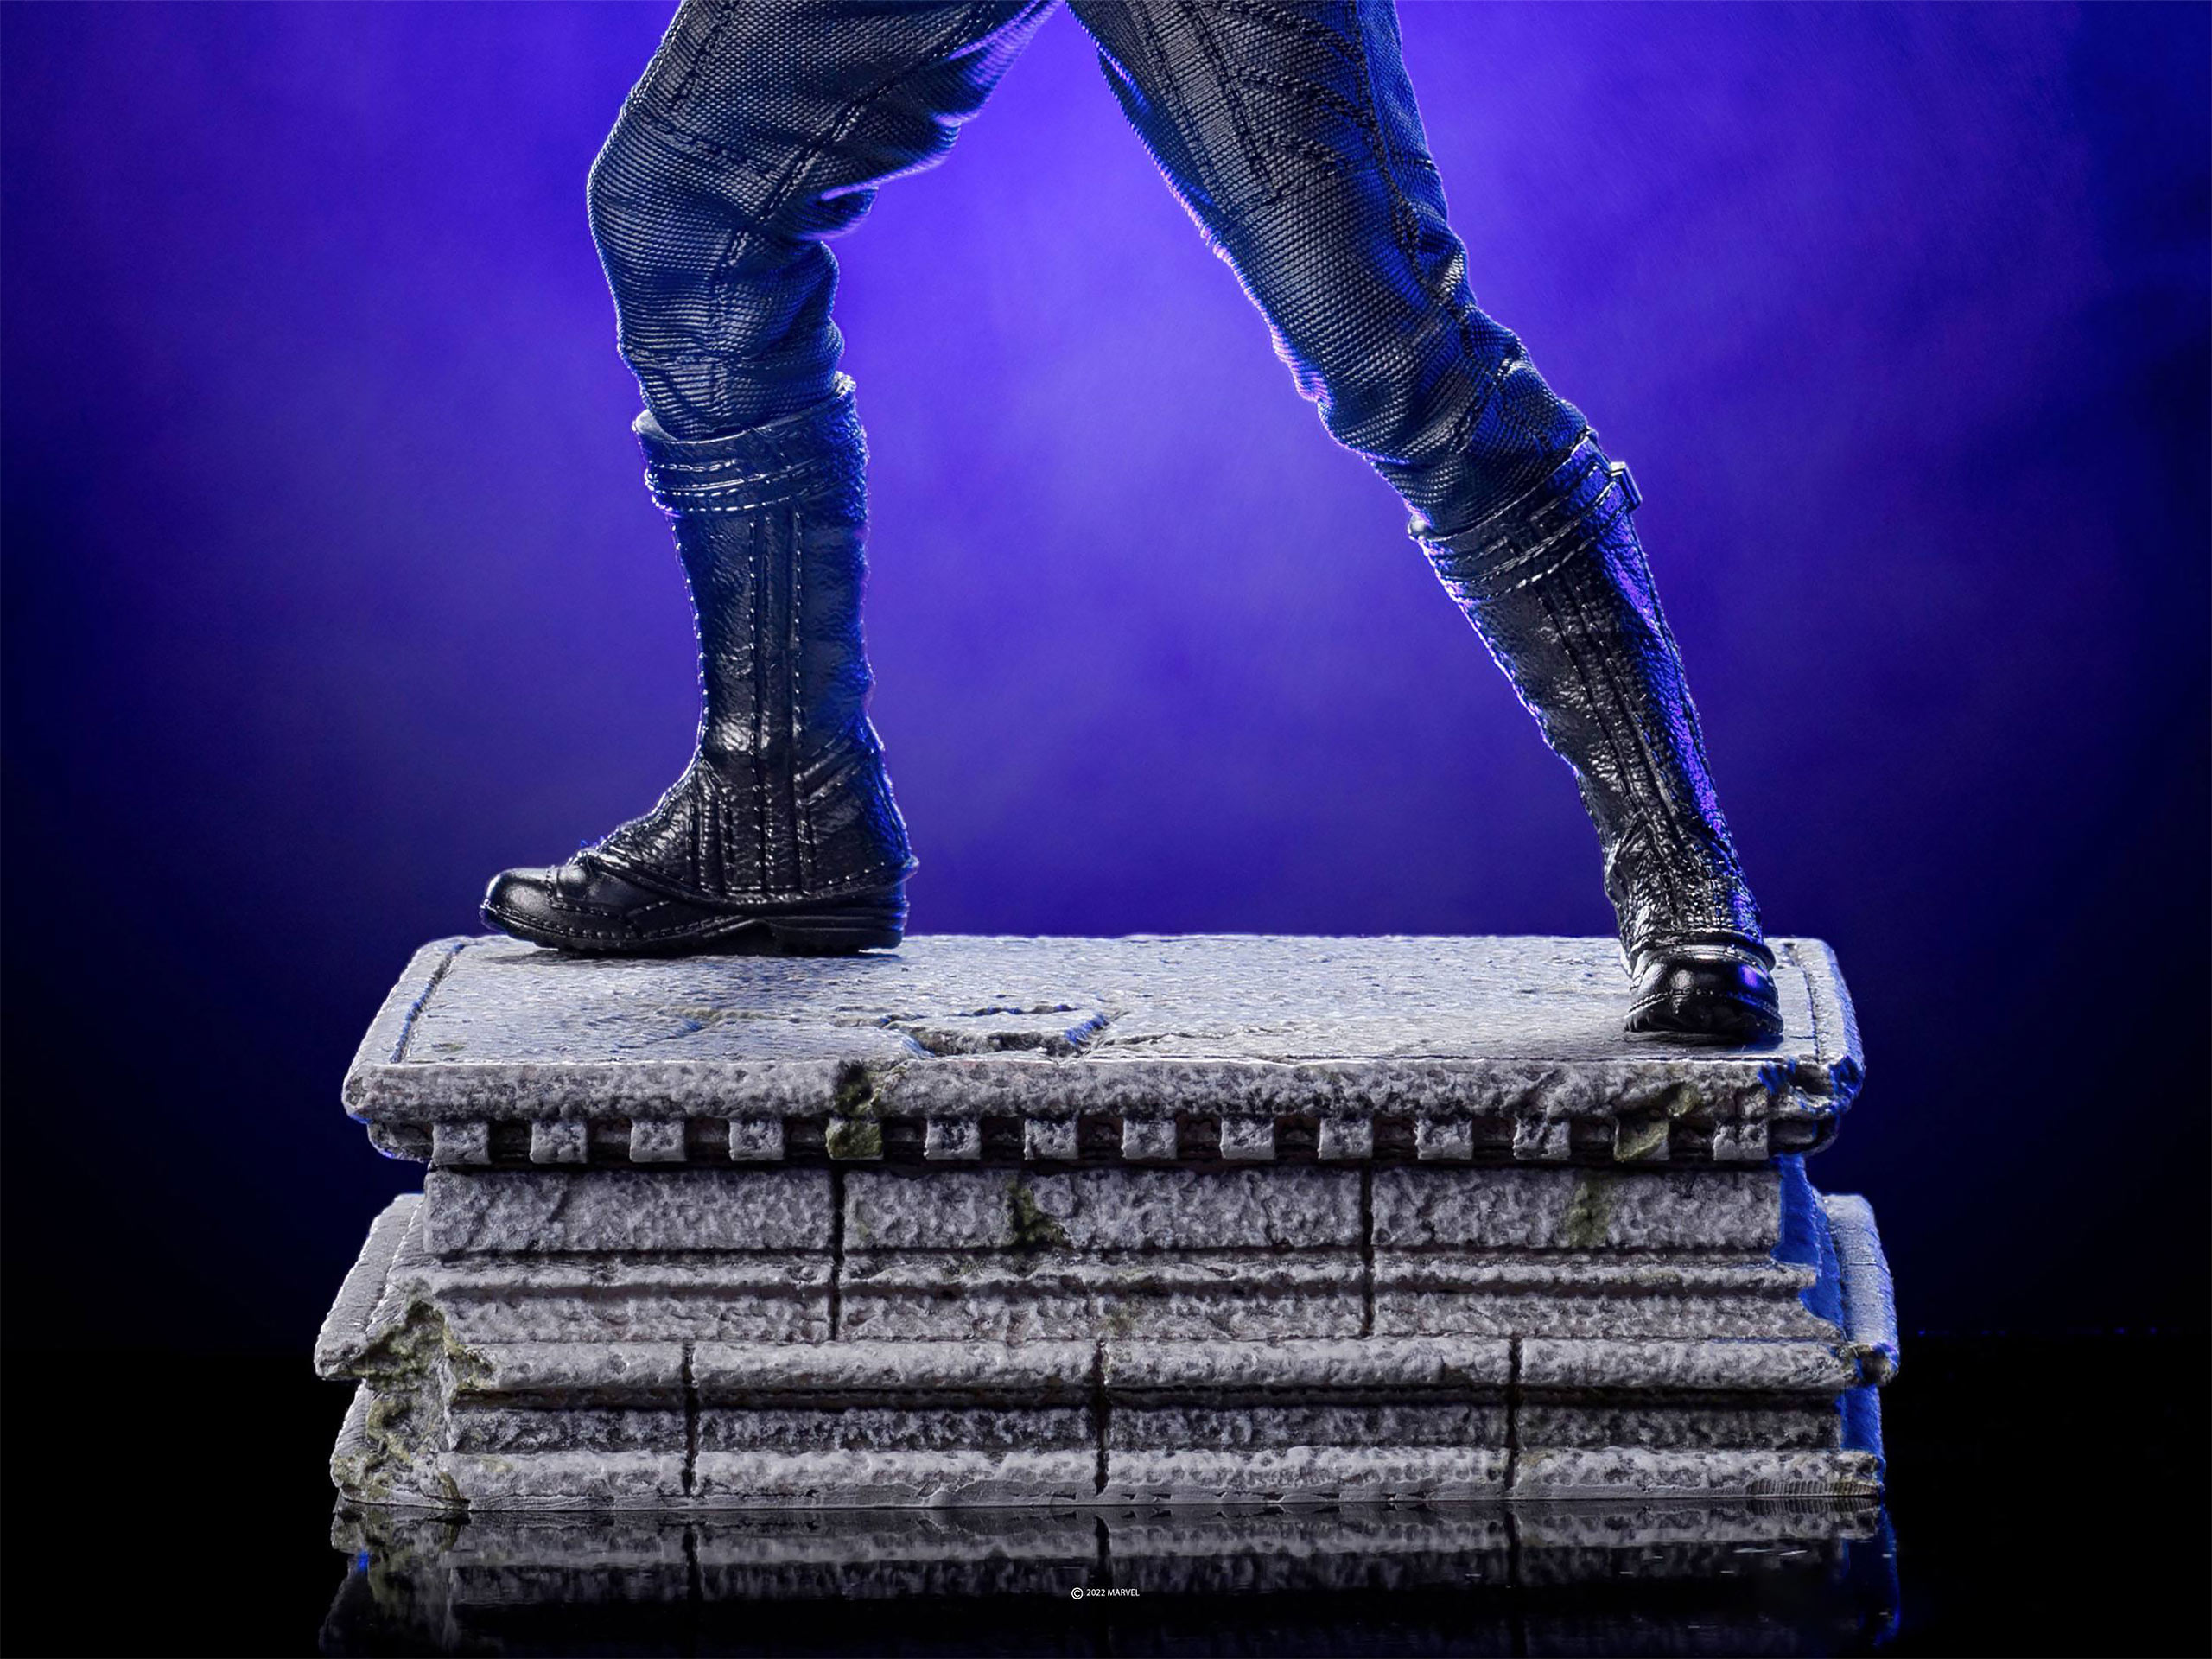 The Falcon and The Winter Soldier - Bucky Barnes BDS Art Scale Deluxe Statue 1:10